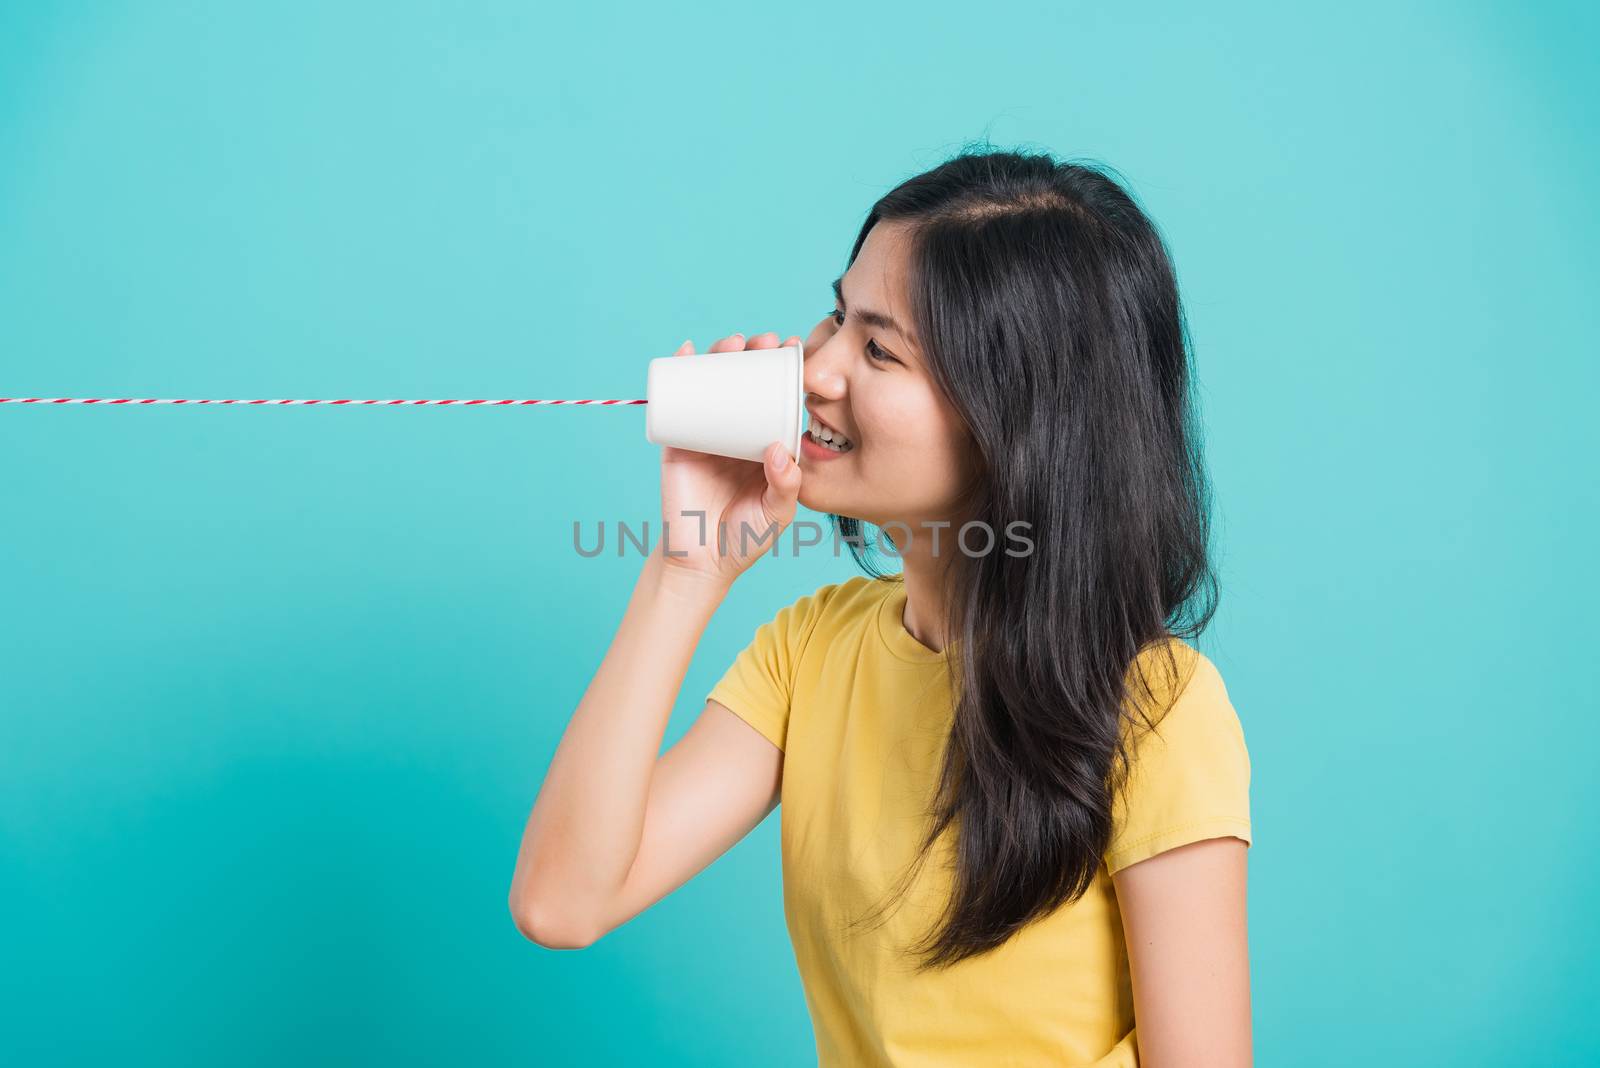 Portrait happy Asian beautiful young woman smile white teeth standing wear yellow t-shirt, She holding paper can telephone for talking, studio shot on blue background with copy space for text